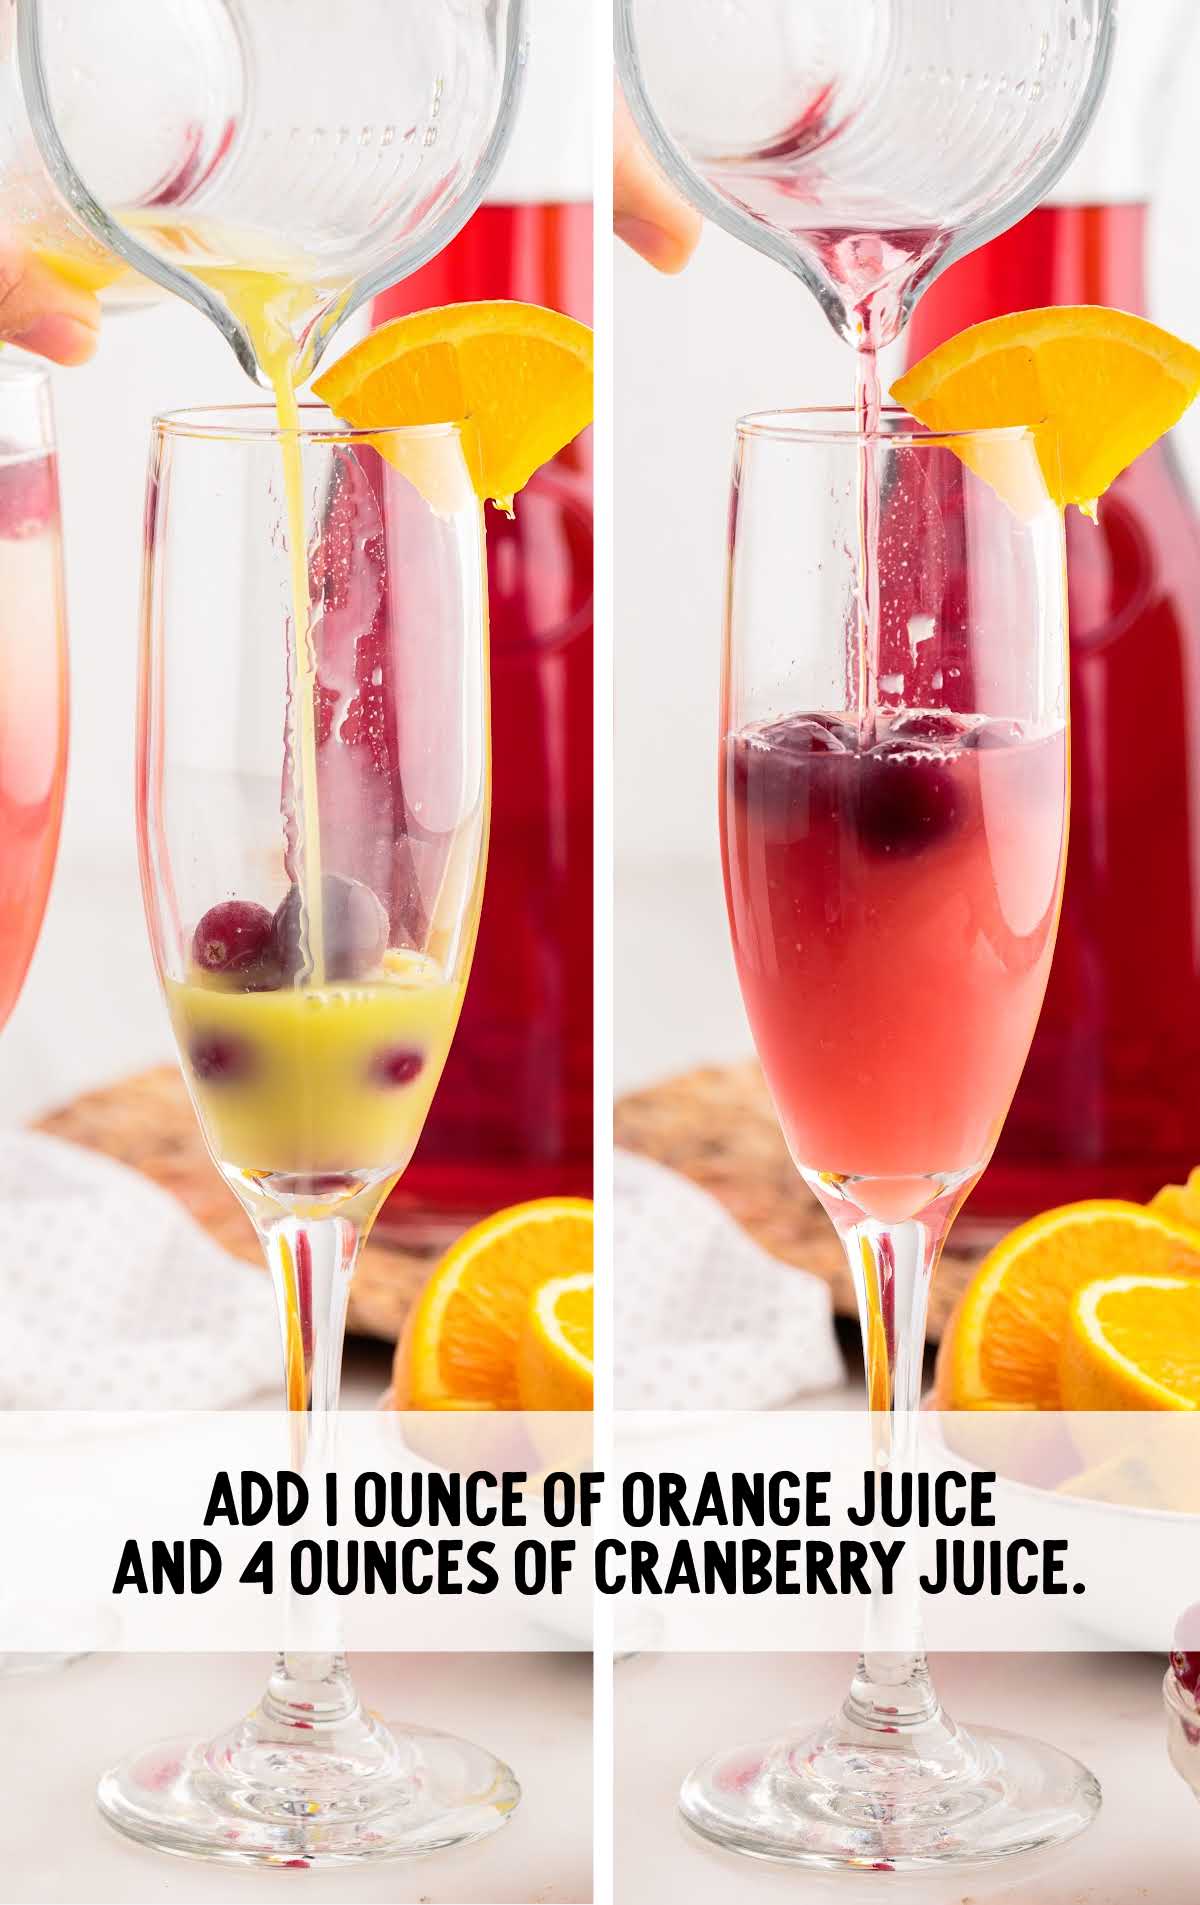 orang juice and cranberry juice added to the glass